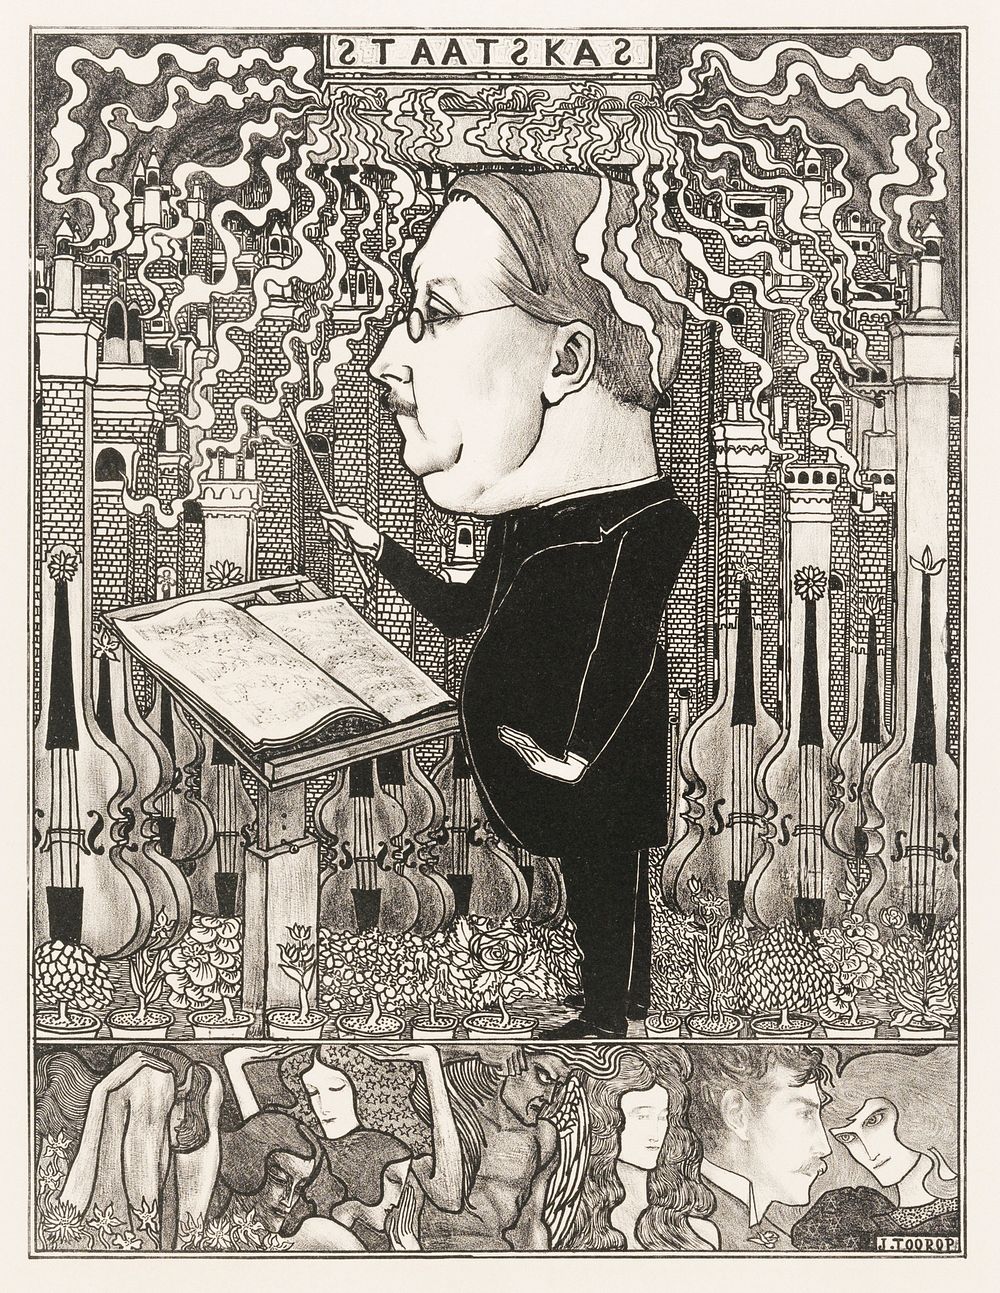 Conductor with violins and smoking chimneys behind (1895) by Jan Toorop. Original from The Rijksmuseum. Digitally enhanced by…